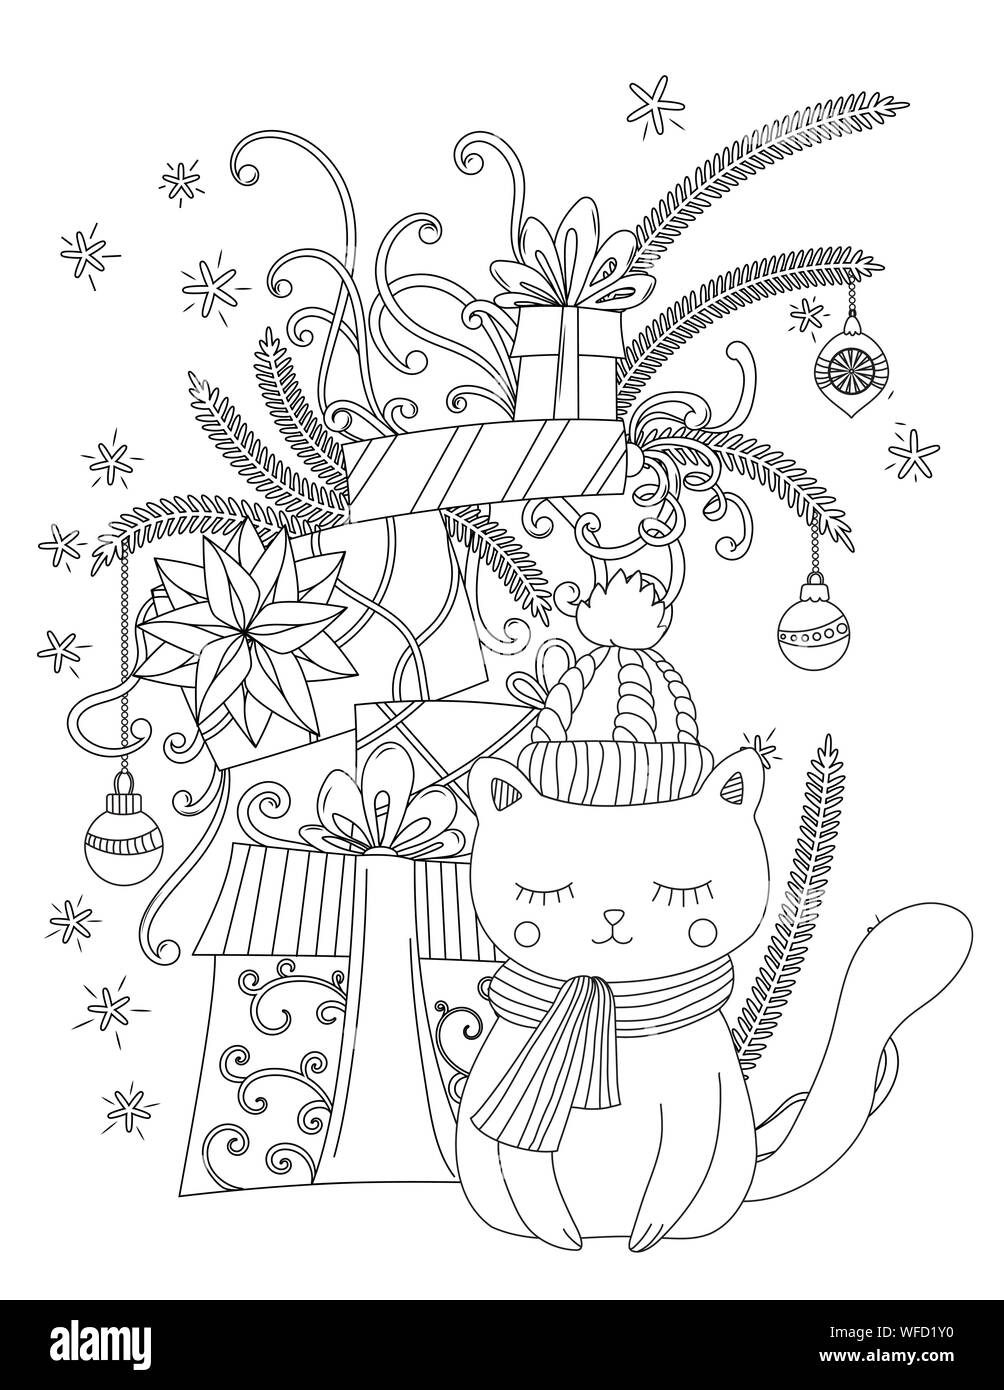 Christmas coloring page for kids and adults. Cute cat with scarf and knitted cap. Pile of holiday presents. Hand drawn vector illustration. Stock Vector